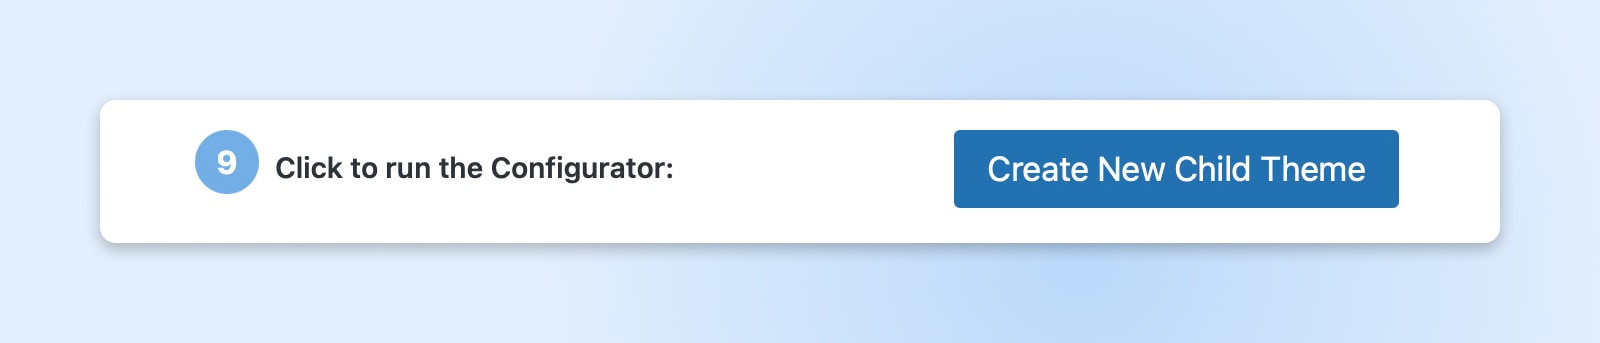 step 9: click to run the configurator and "create new child theme" button